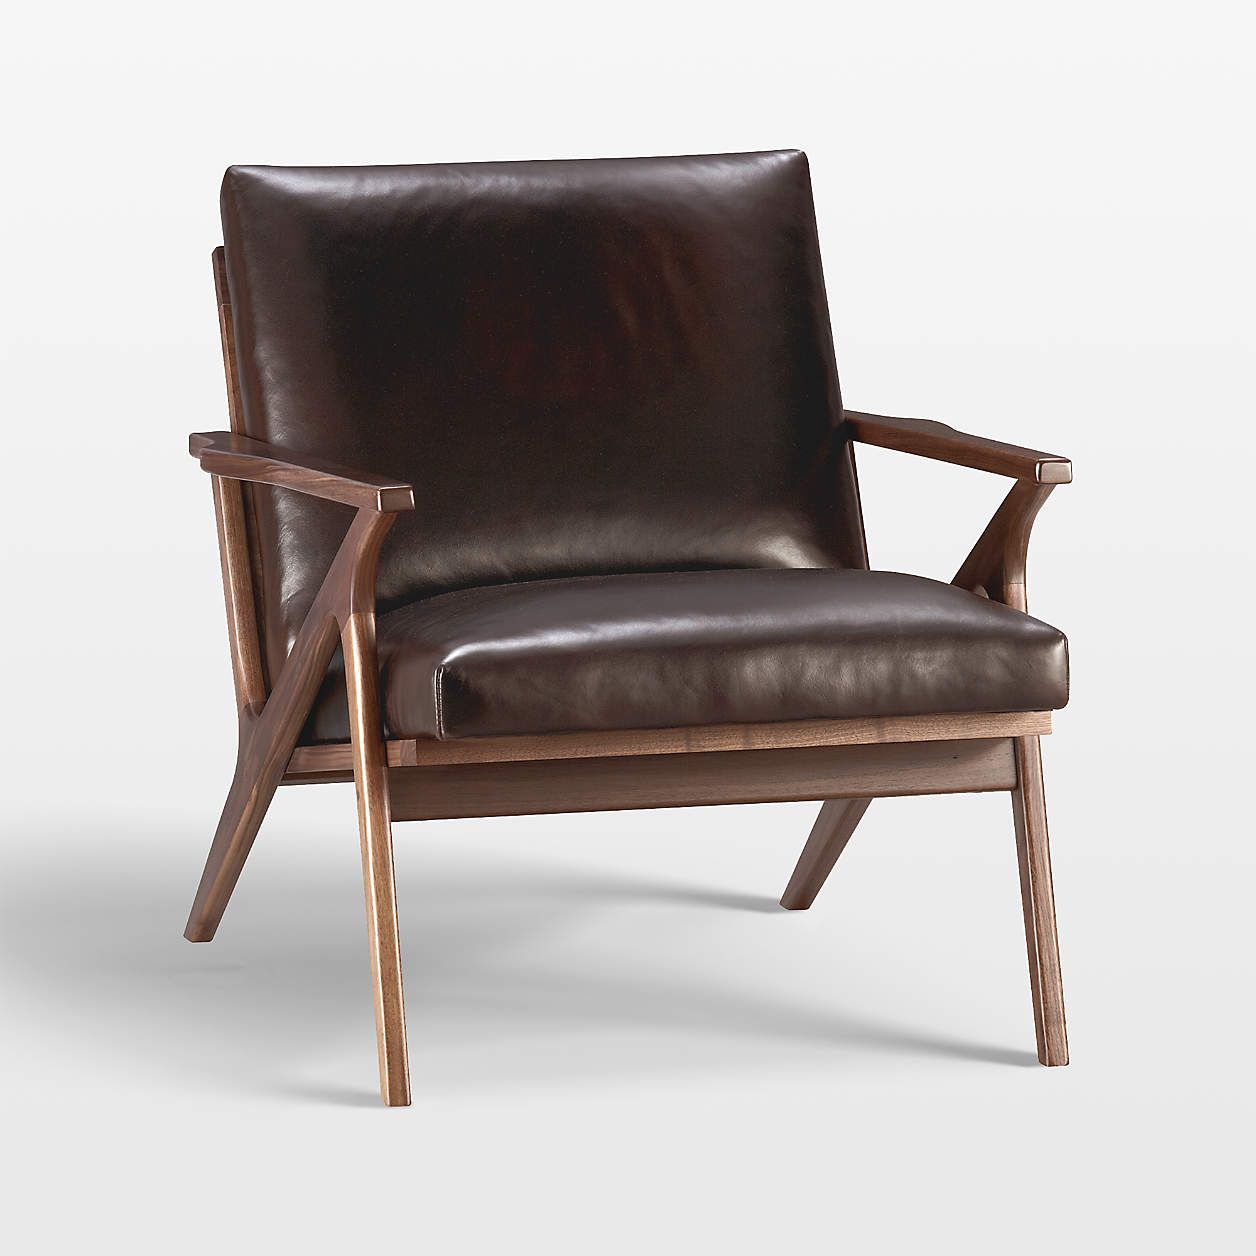 Cavett Leather Walnut Wood Frame Accent Chair + Reviews | Crate & Barrel | Crate & Barrel